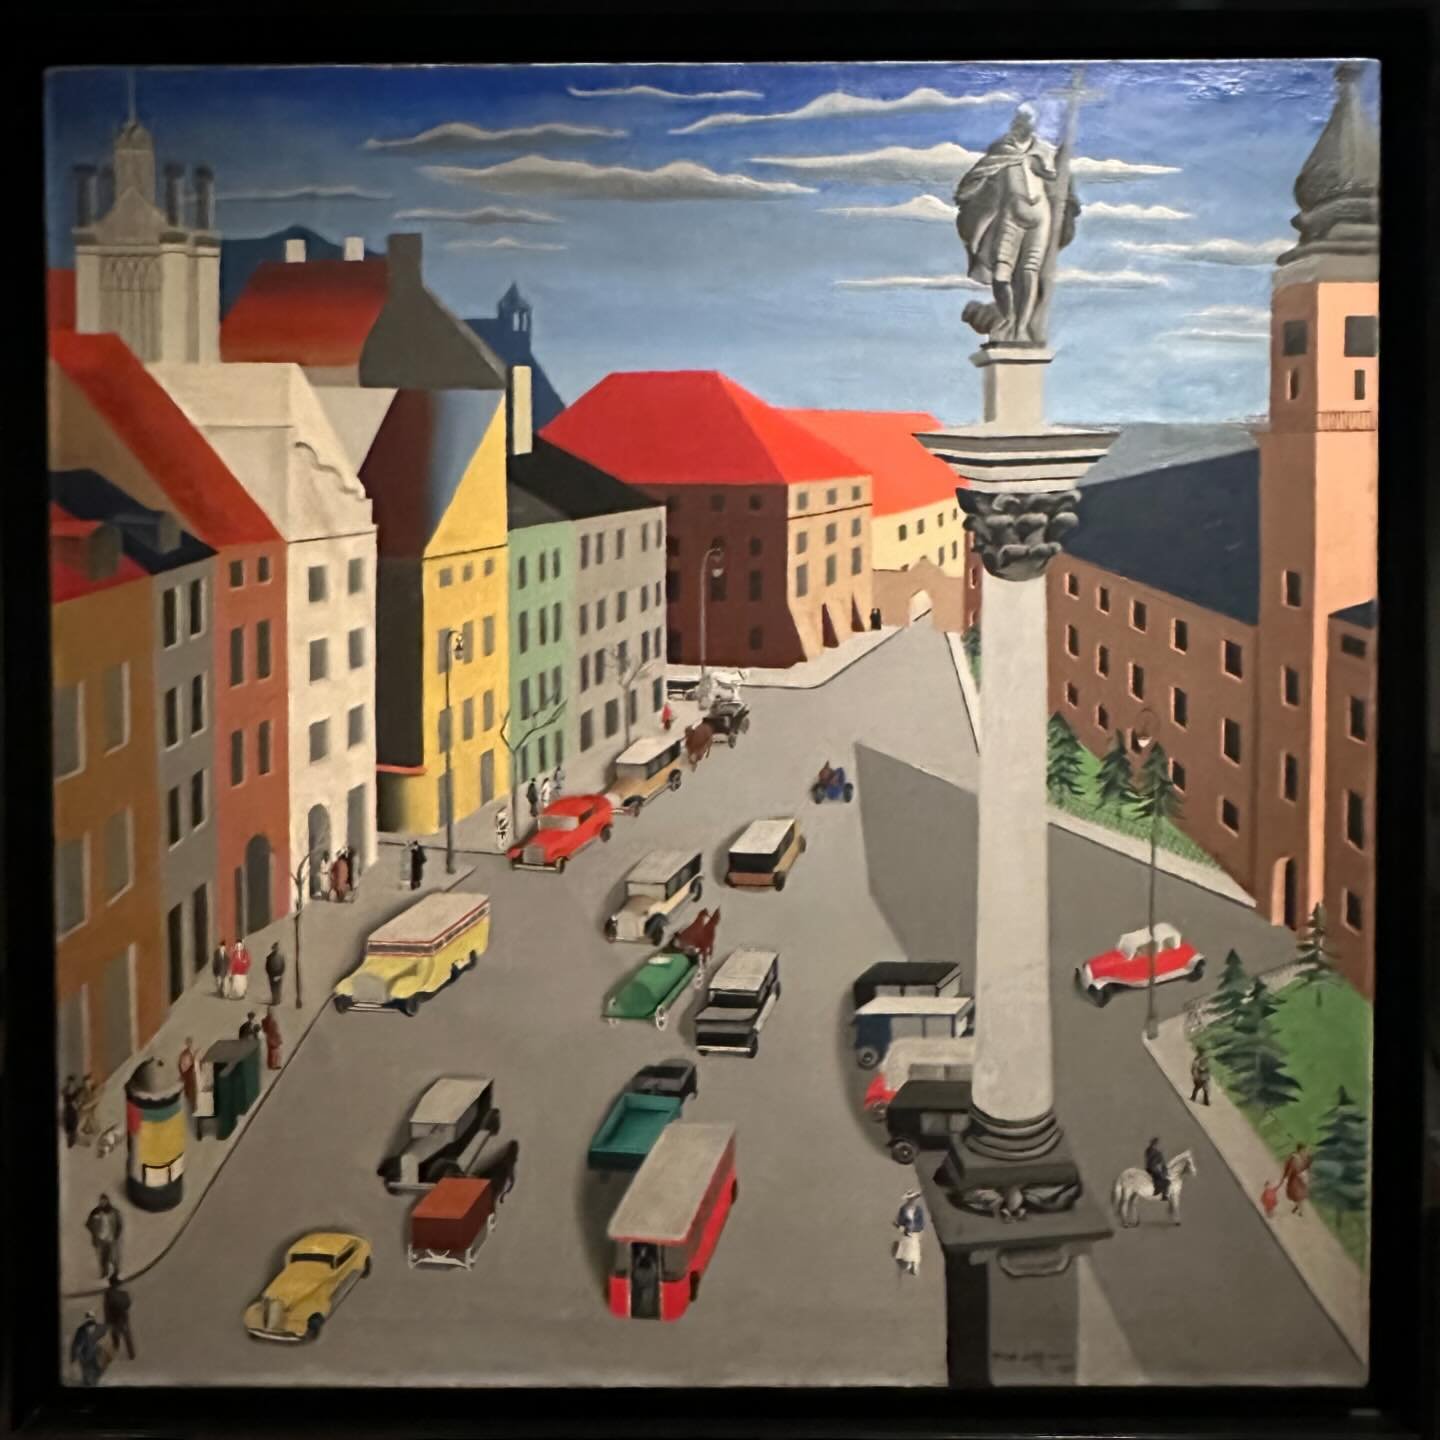 Maria Ewa Łunkiewicz-Rogoyska (1905-1967)
Plac Zamkowy / Castle Square
1935

Warsaw in an Art Deco-ized rendering- capturing this modern city before the Nazis destroyed the medieval center and flattened most of the rest of town.
🎨

Łunkiewicz-Rogoys